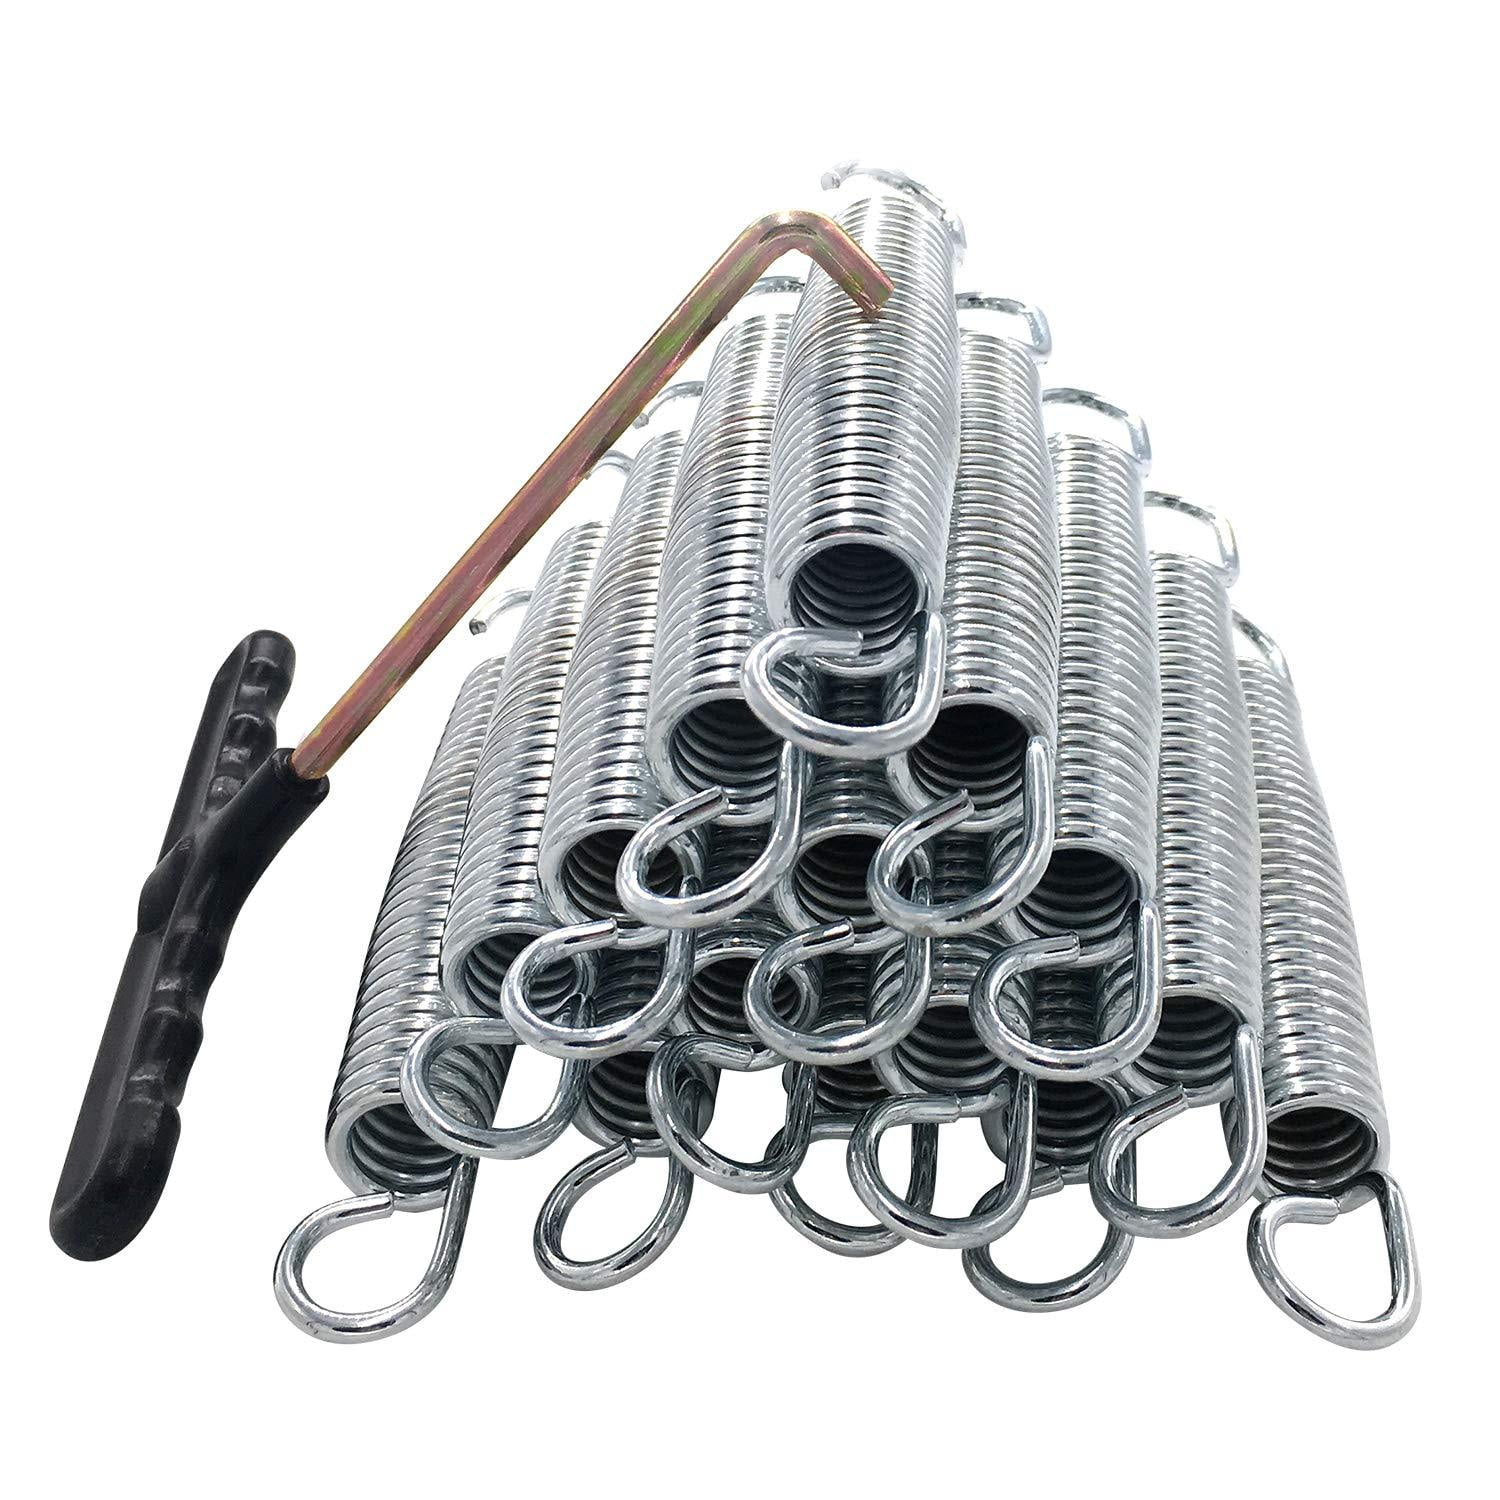 ZhenT Trampoline Spring Heavy Duty Galvanized Steel Replacement Kit for Extra Bounce,Come with Free T-Hook Set of 15 